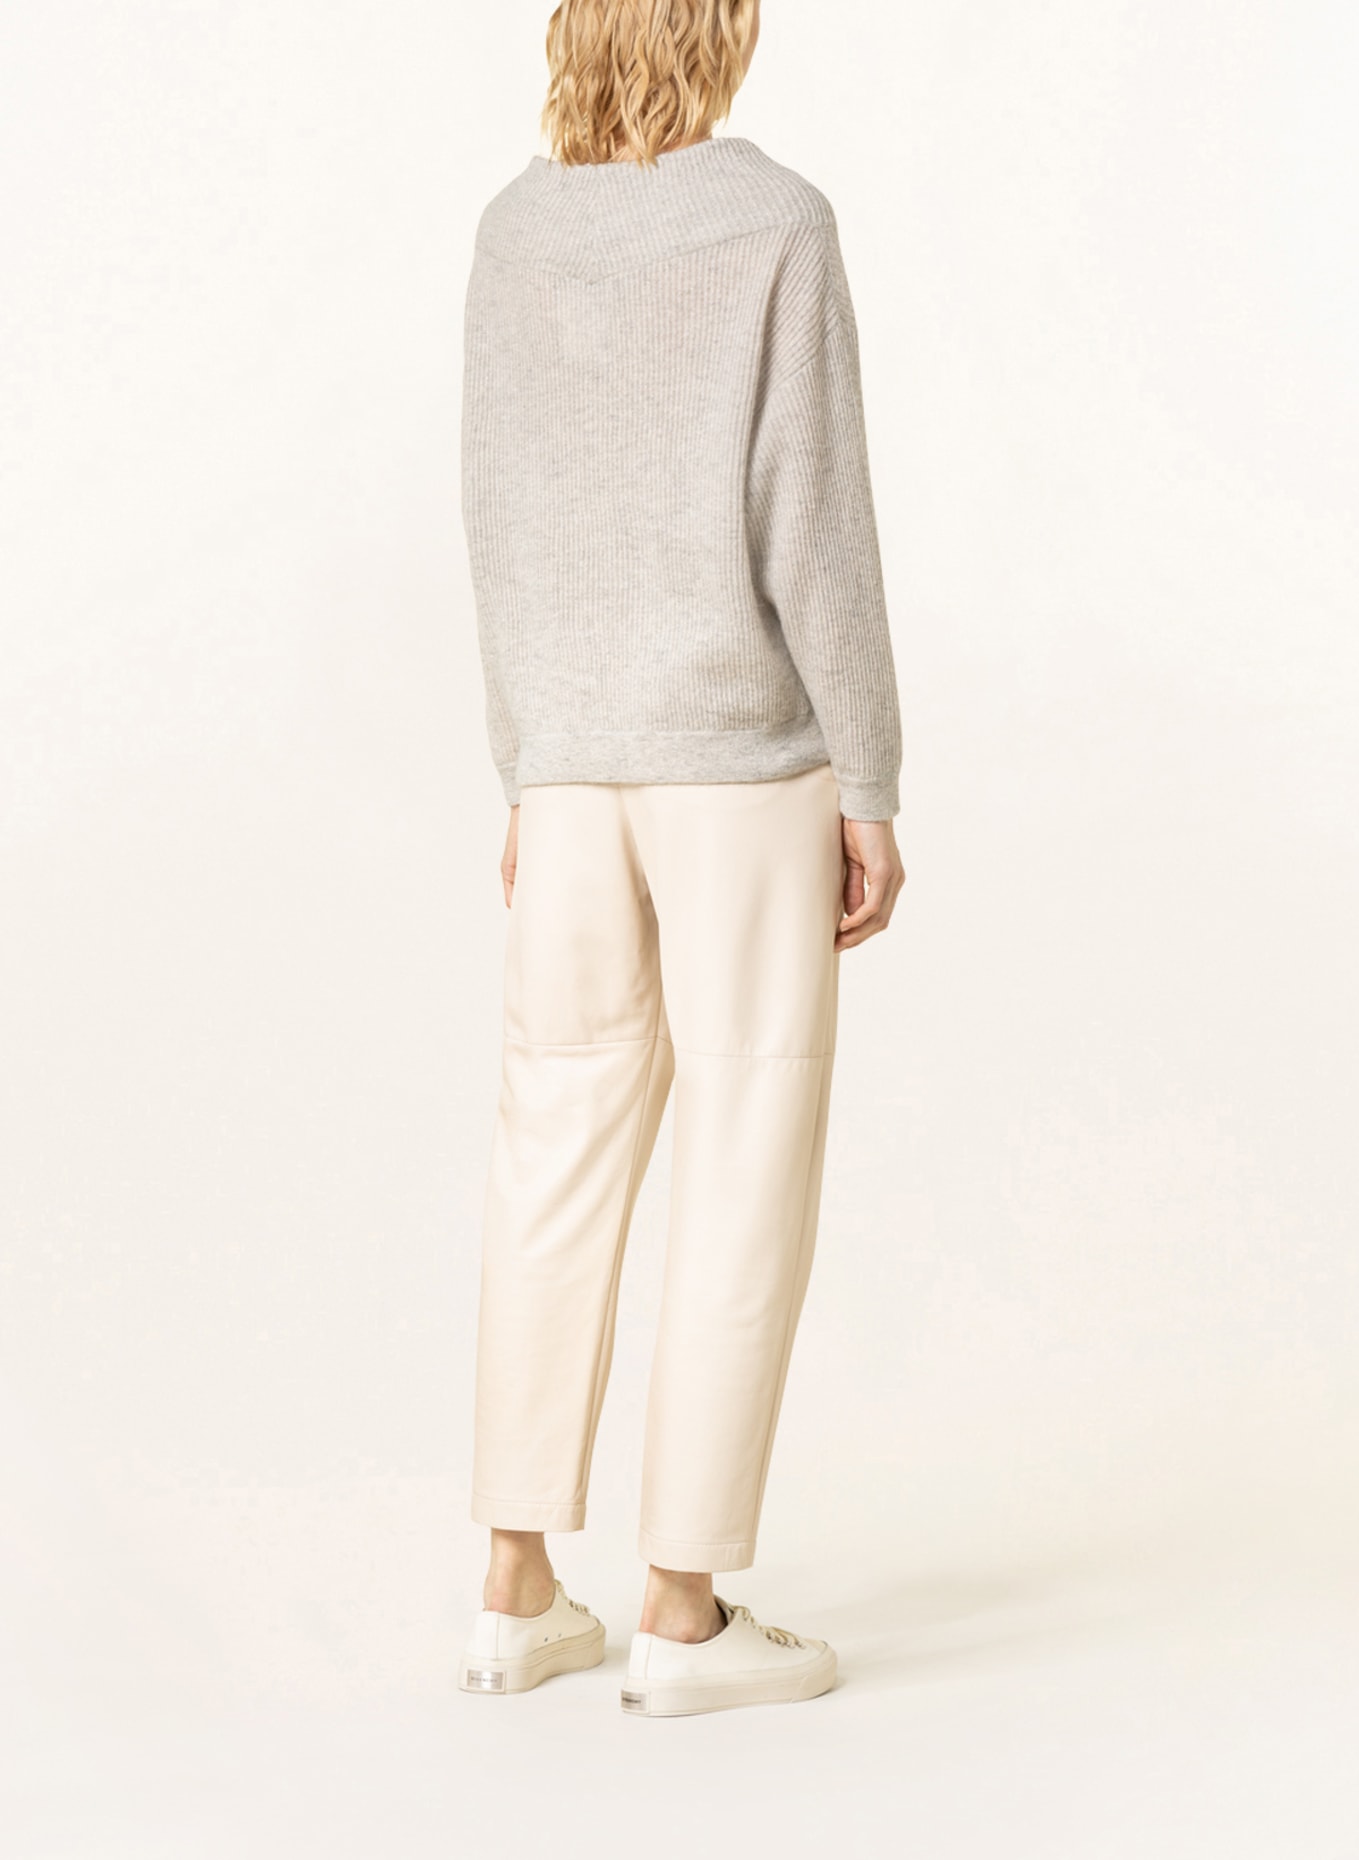 BRUNELLO CUCINELLI Oversized sweater with mohair and glitter thread , Color: LIGHT GRAY (Image 3)